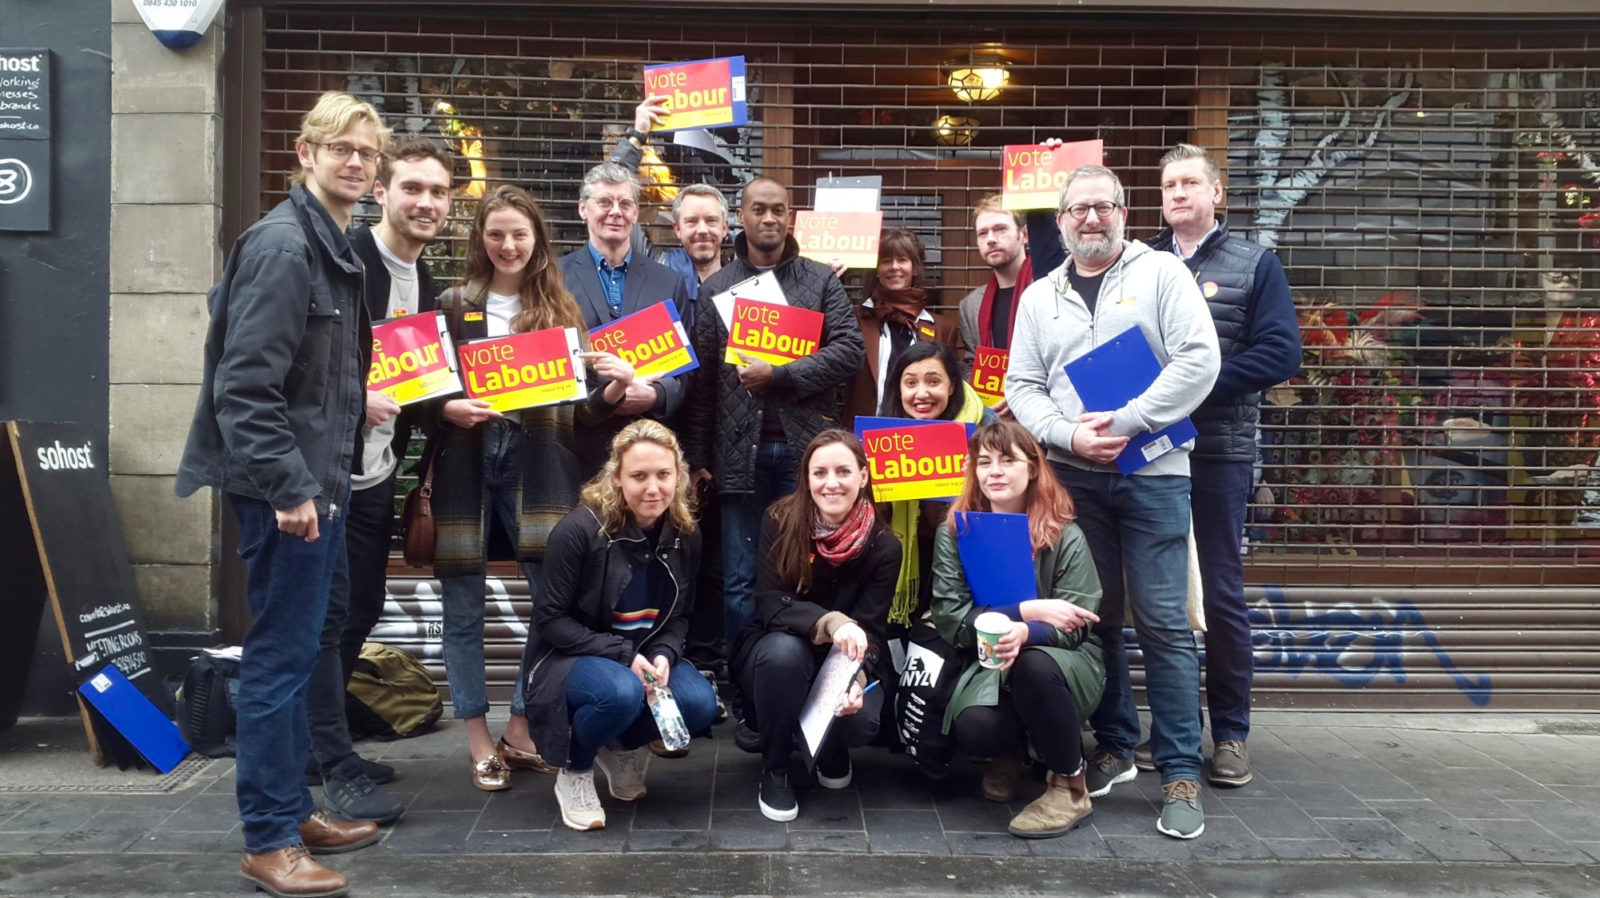 Some of our local activists out canvassing in the West End for the general election, holding 